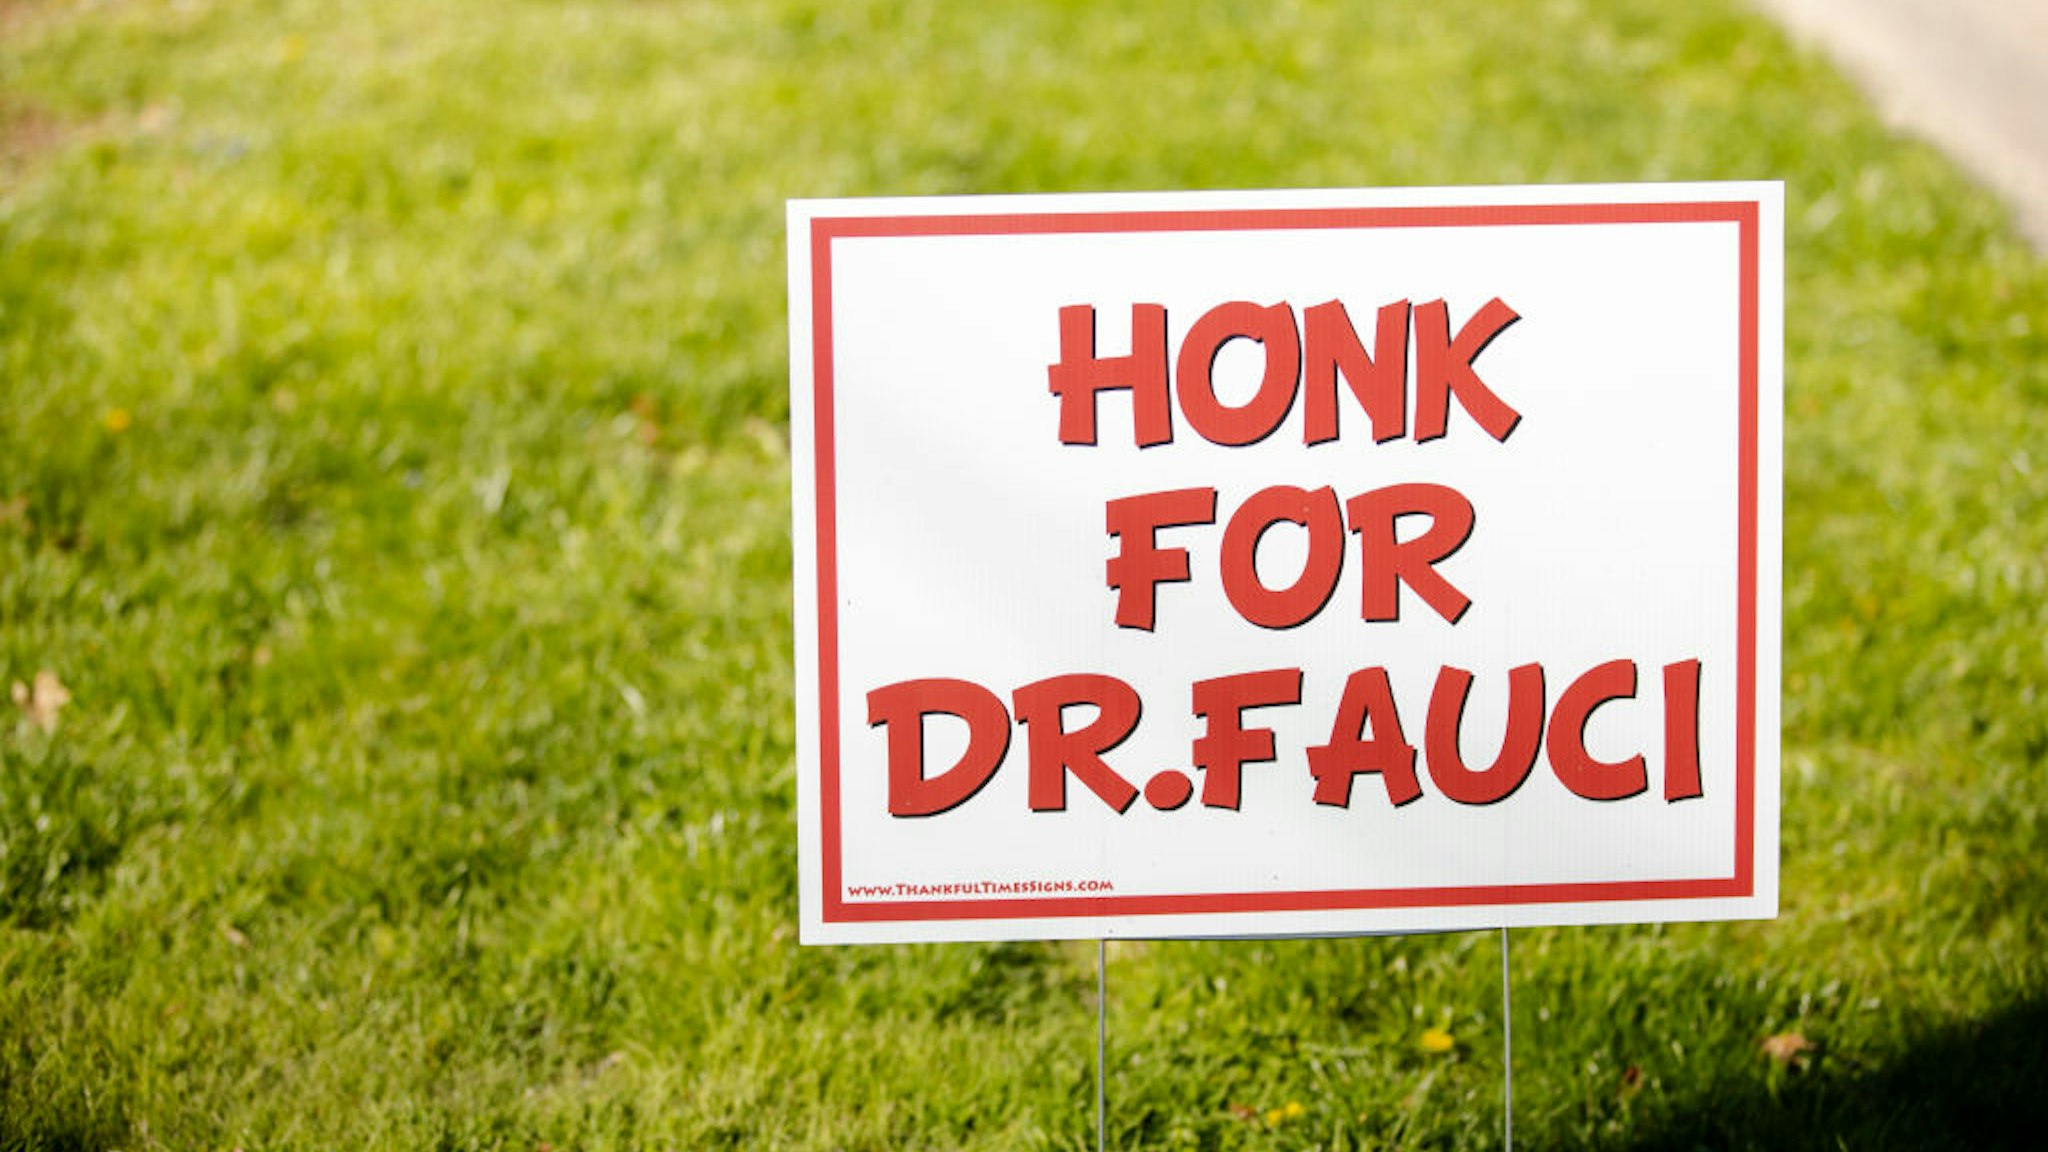 A sign on a lawn says, "Honk for Dr. Fauci" to show support for Dr. Anthony S. Fauci, M.D., director of the National Institute of Allergy and Infectious Diseases (NIAID).